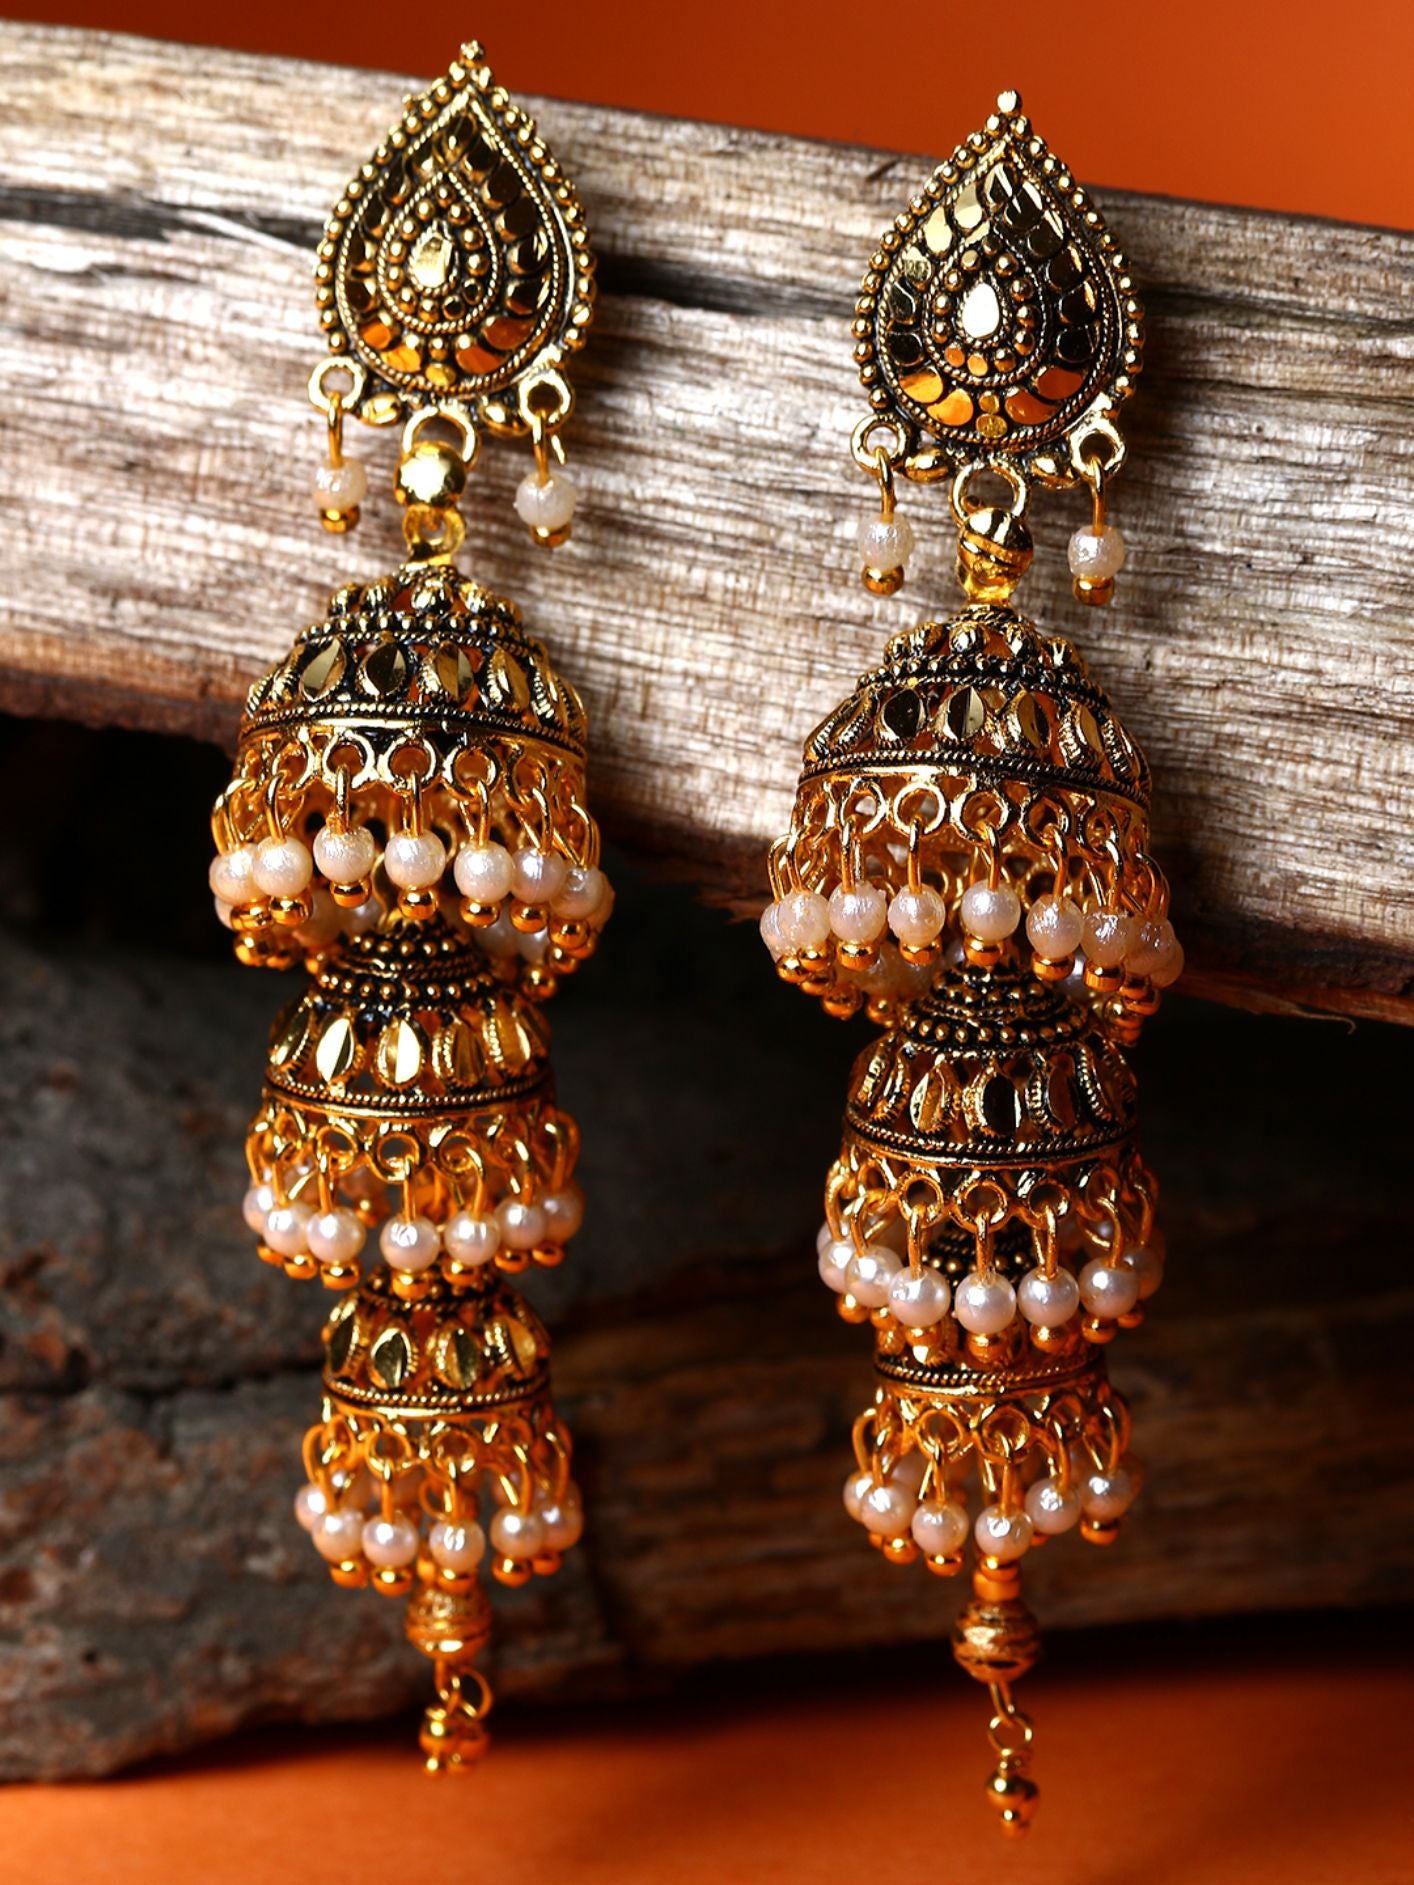 Women's Gold-Plated Enamelled Dome Shaped Jhumkas - Anikas Creation